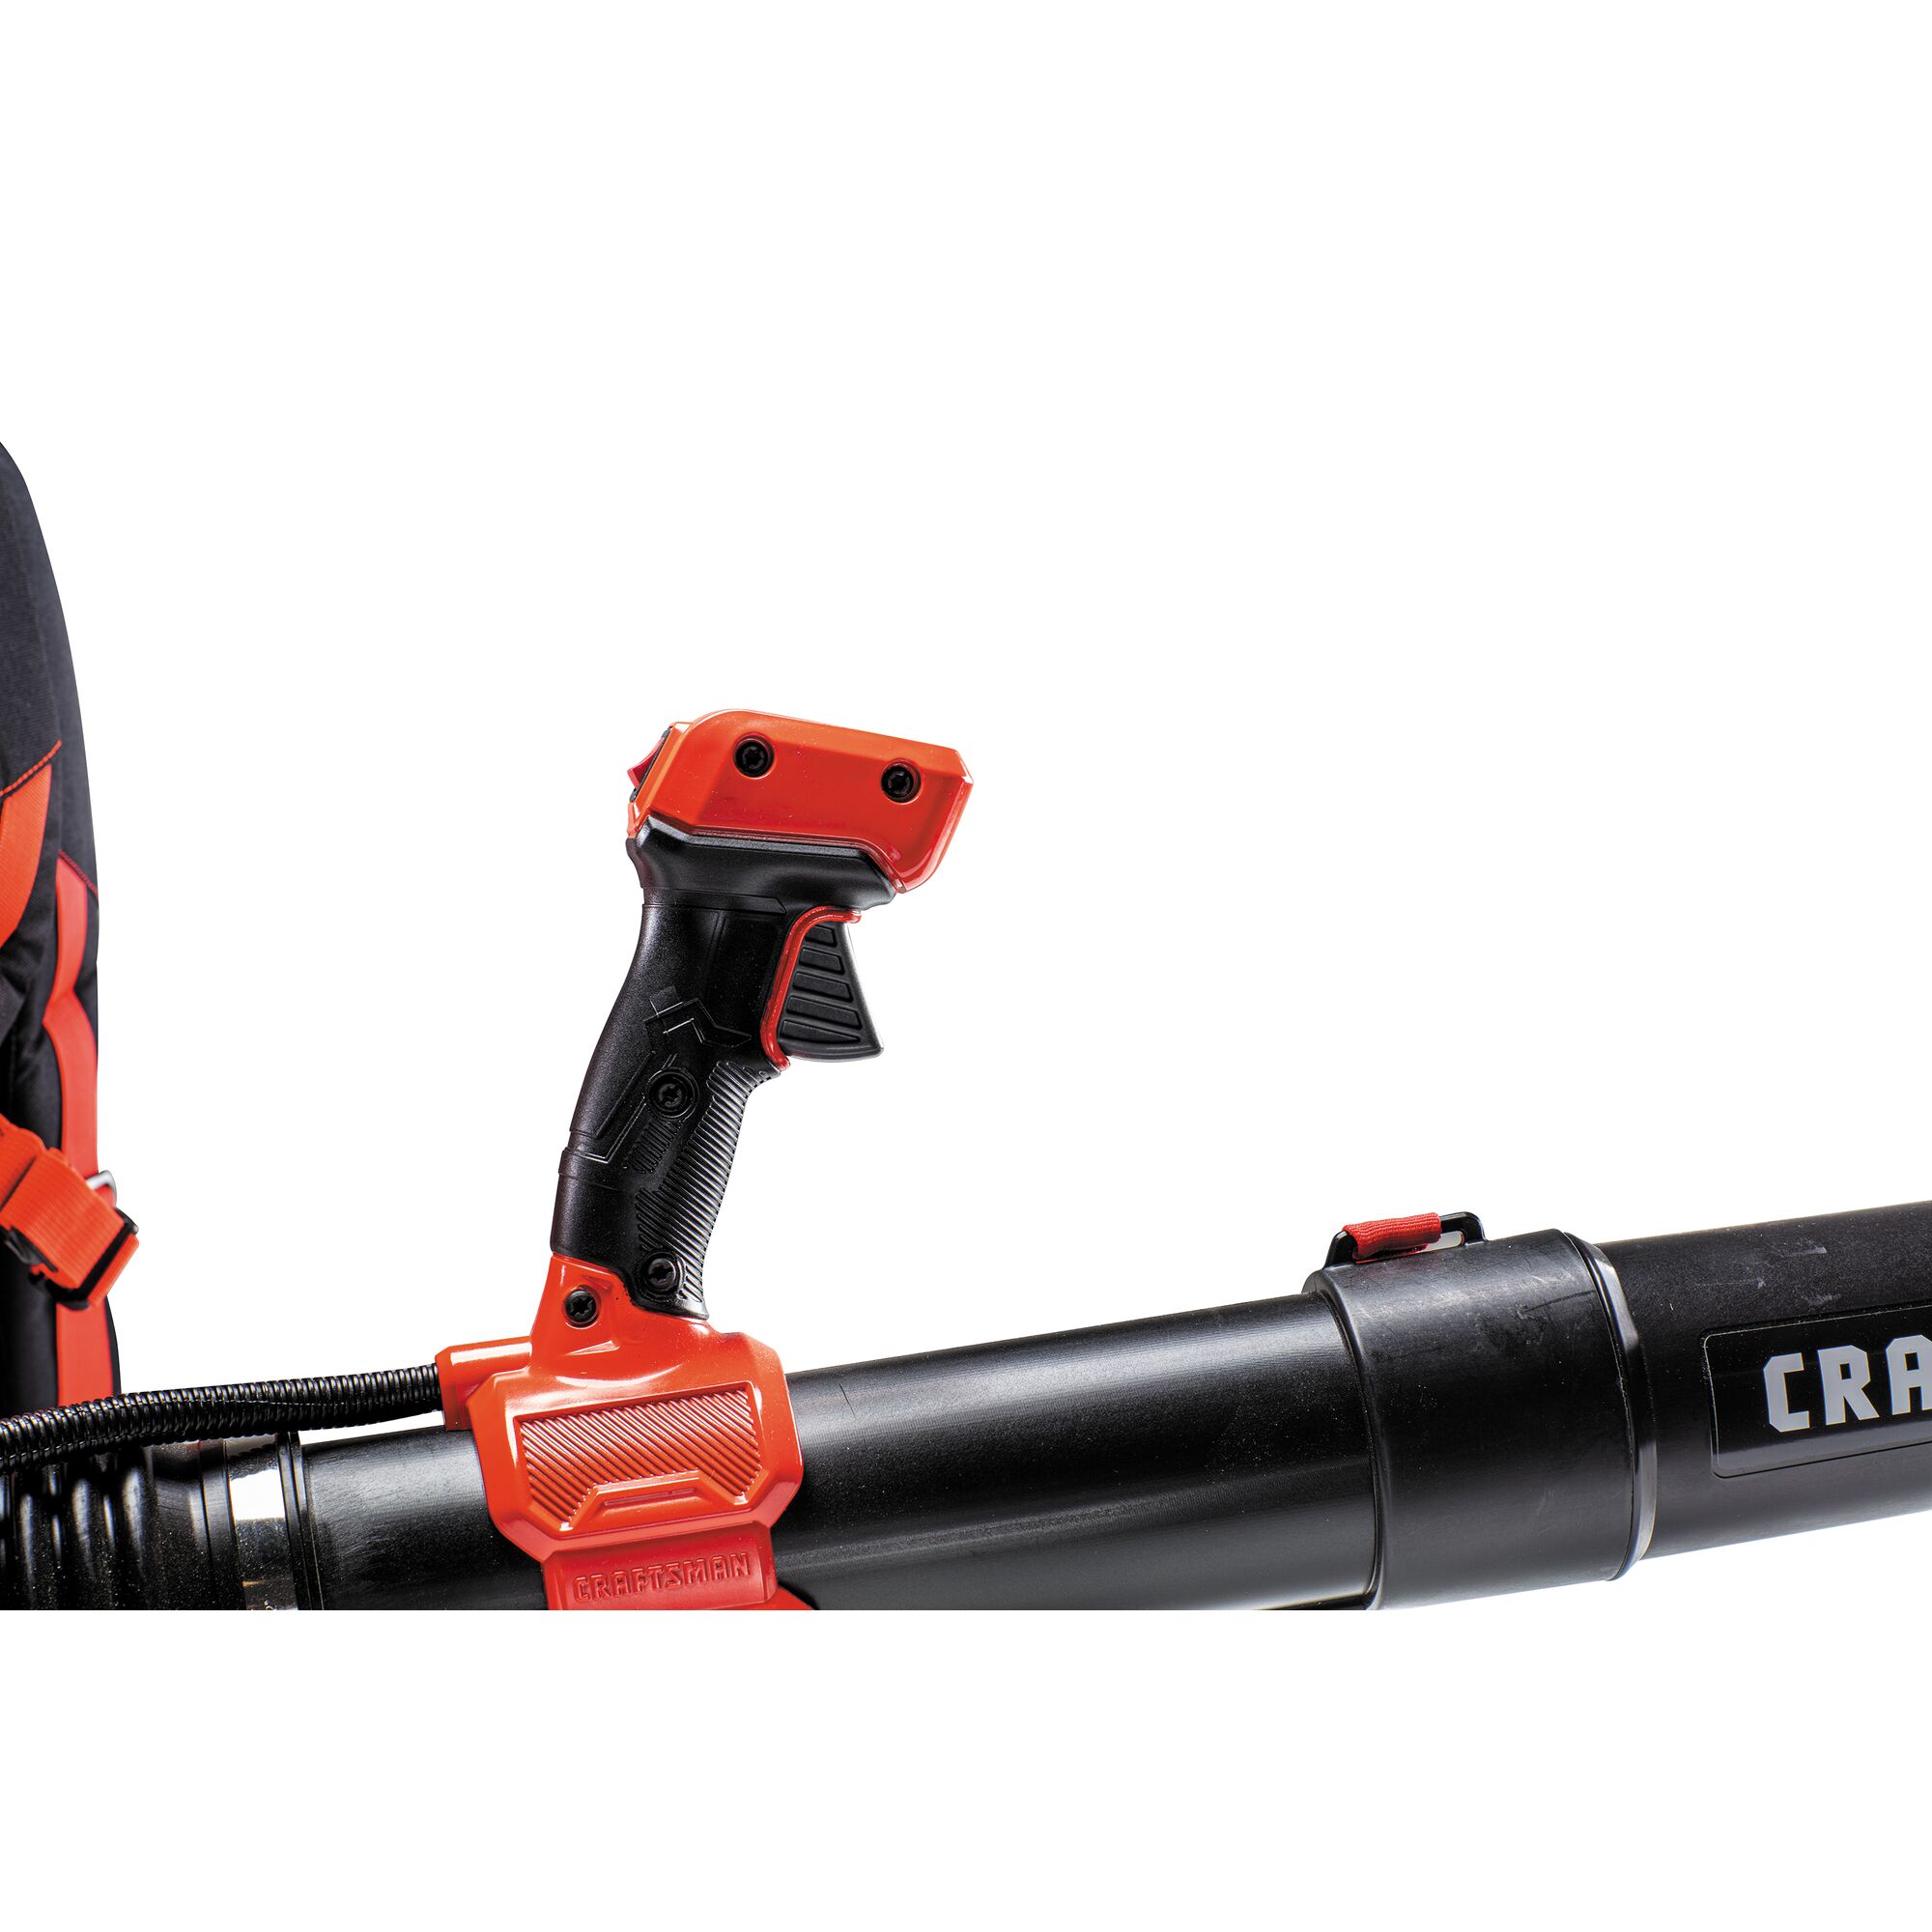 Easy pull start feature of 51 C C 2 cycle gas backpack leaf blower.